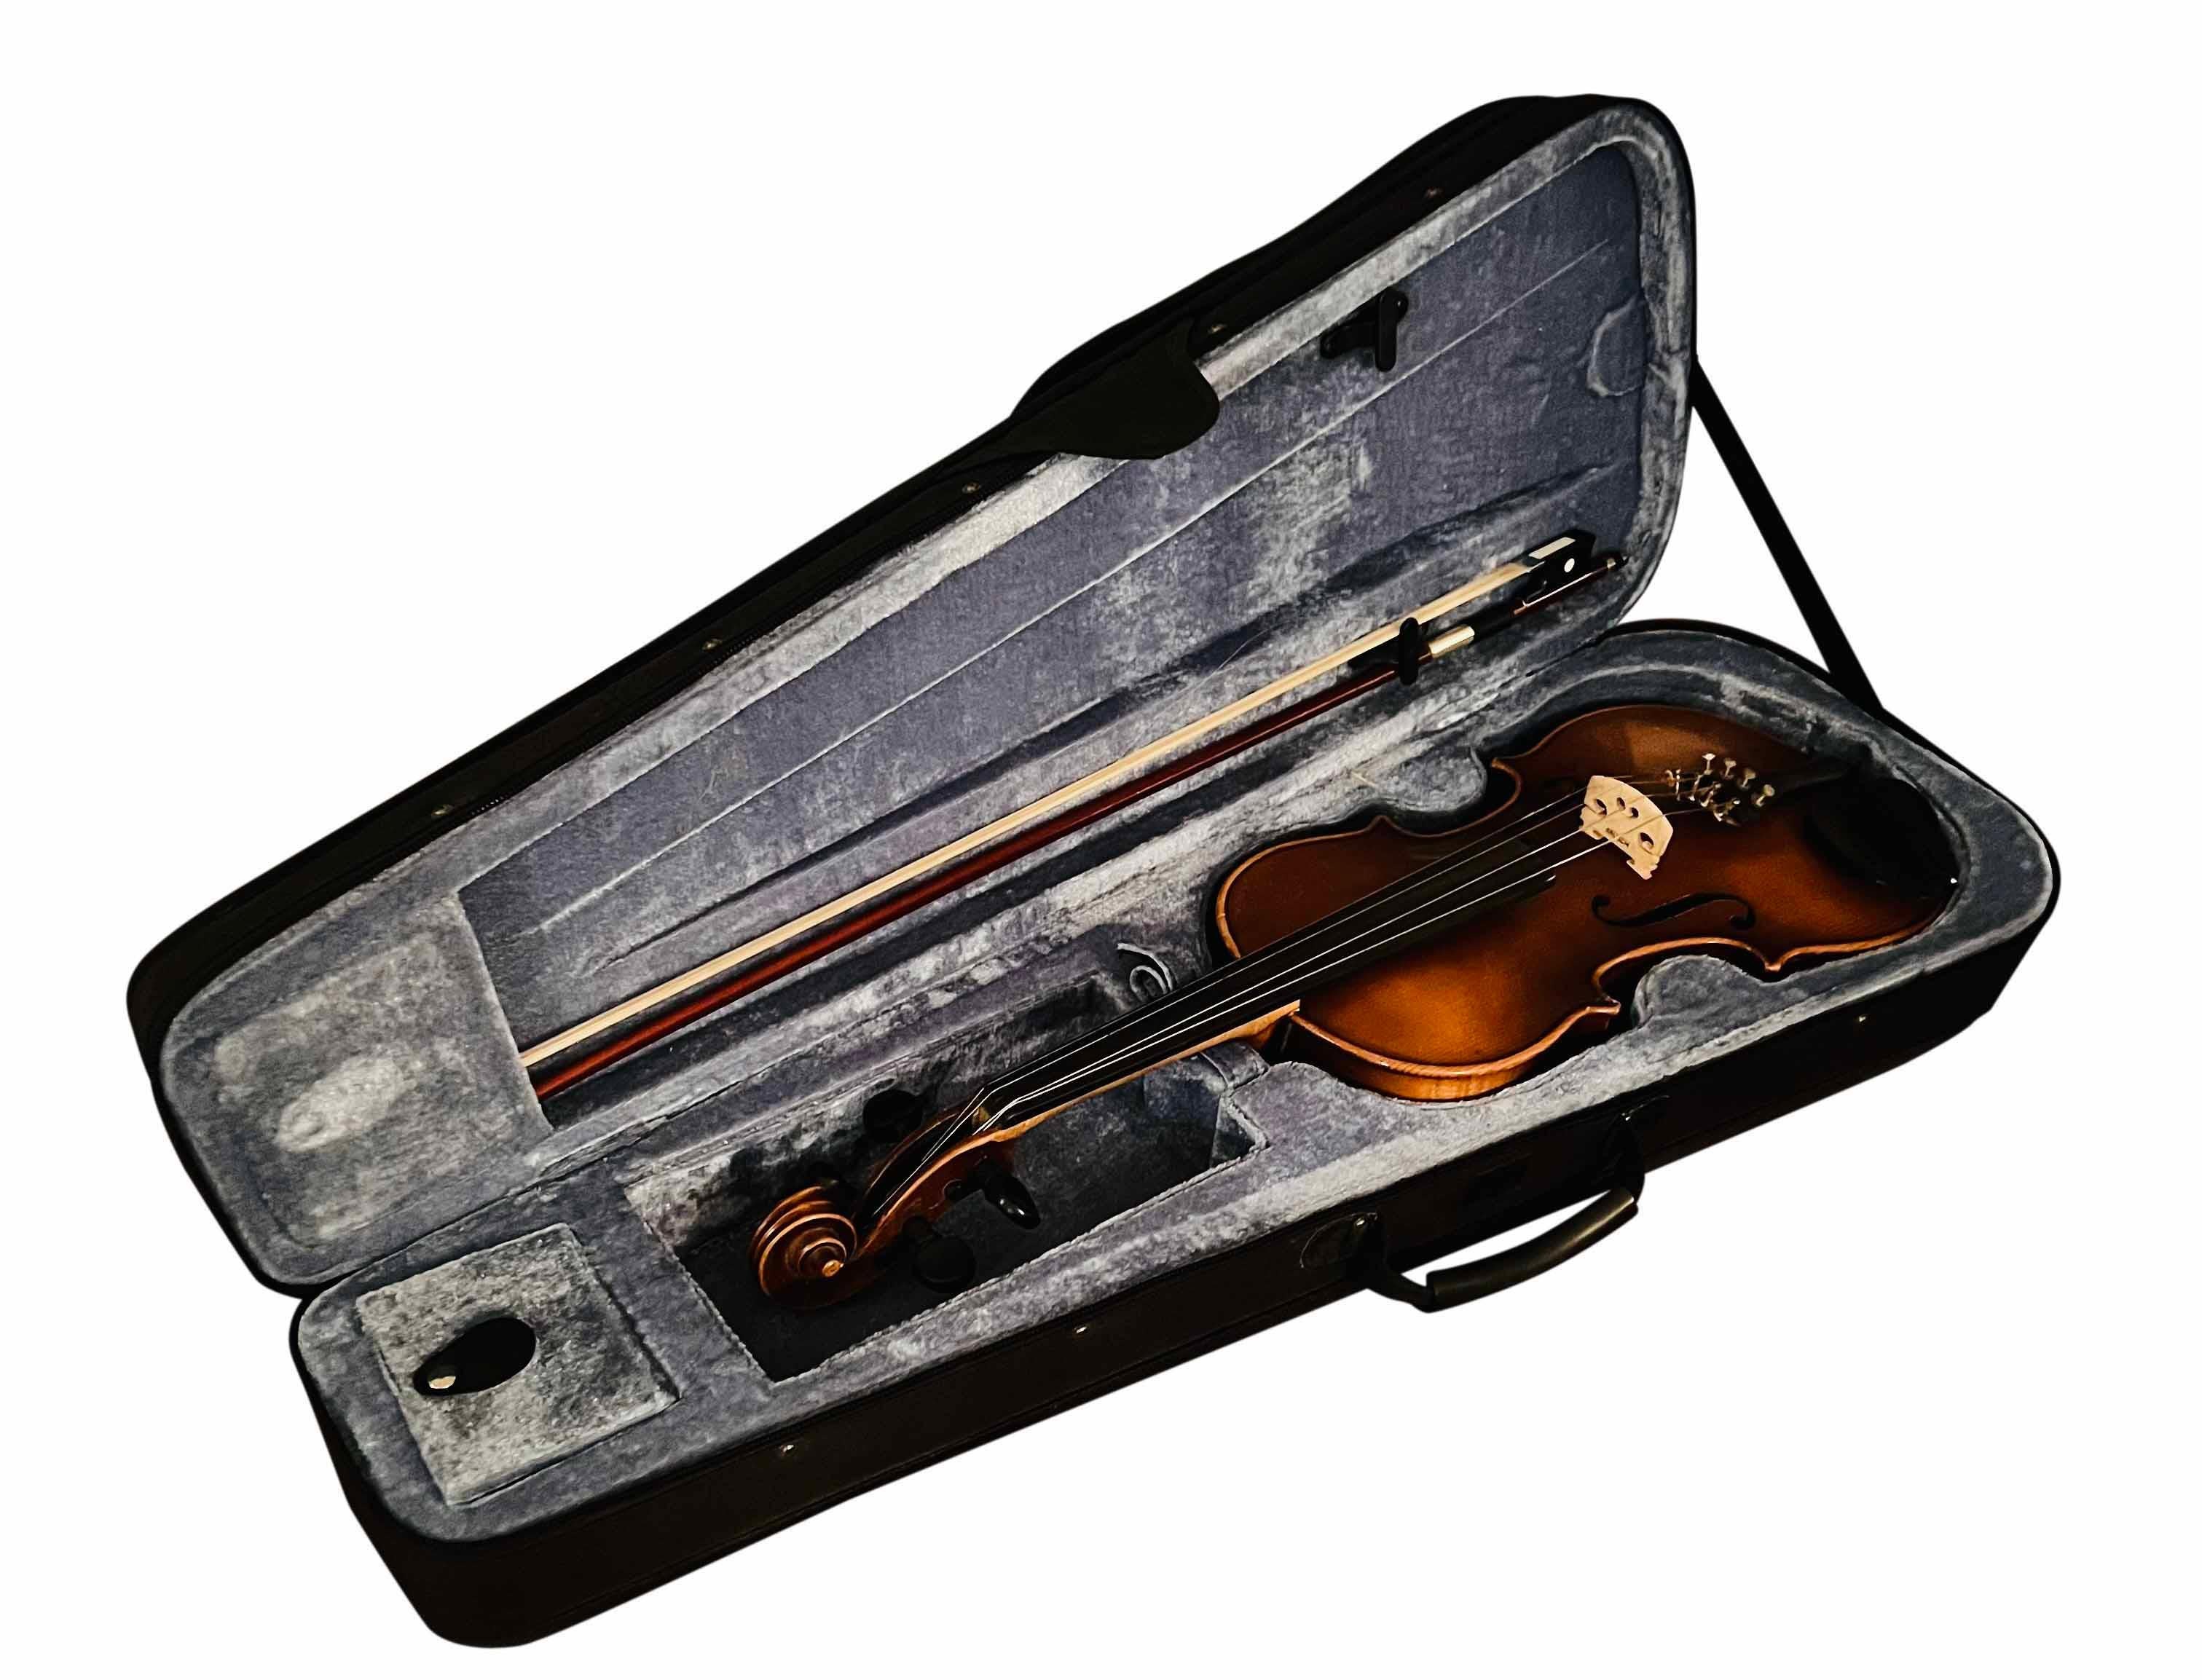 1970 3/4 E.R. Pfretzschner Hand-Crafted Violin in the Style of A. Stradivarius en vente 7